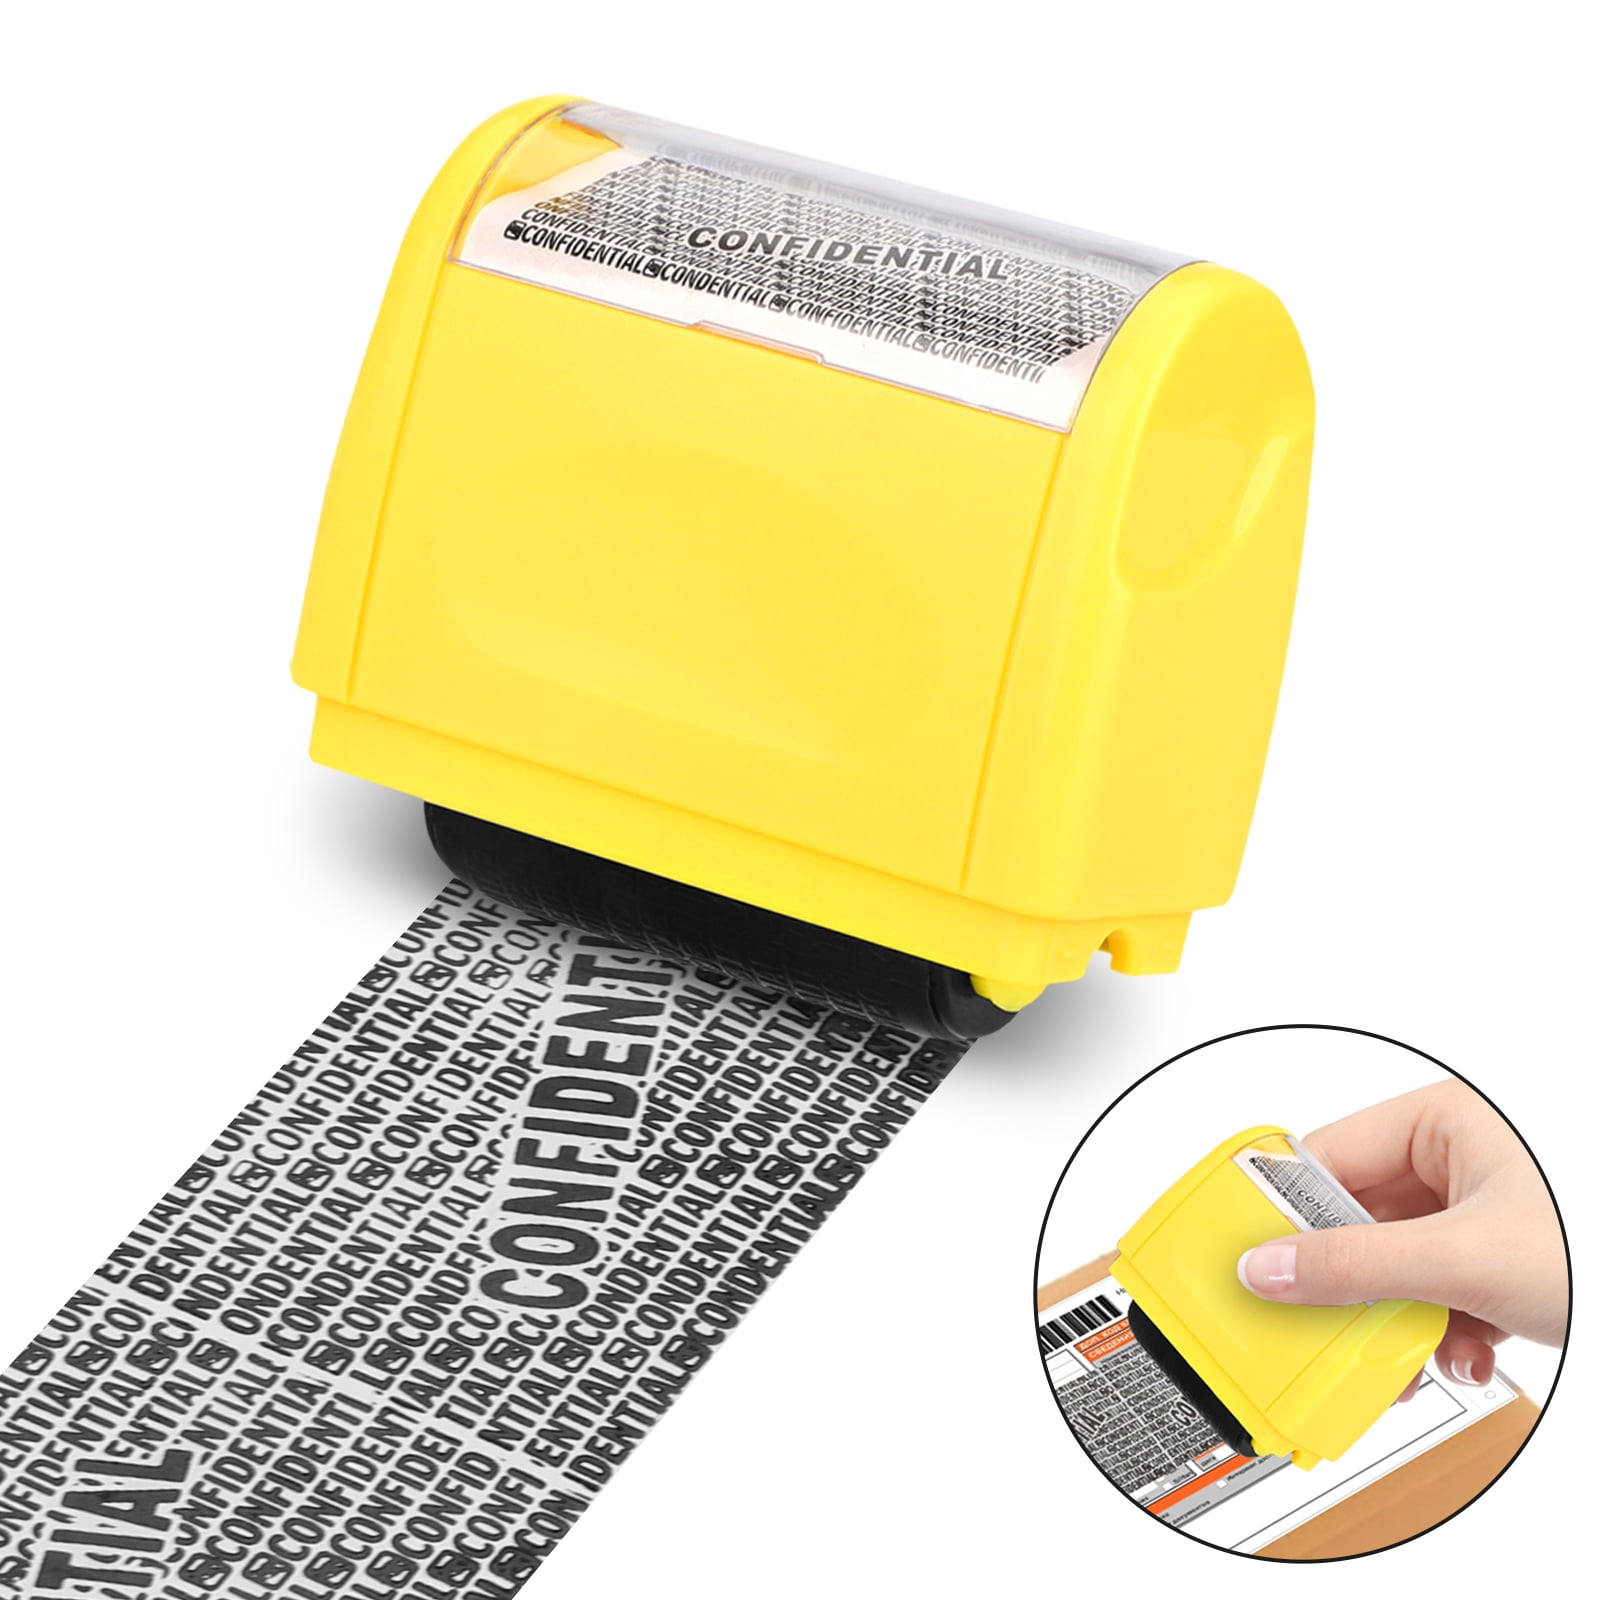 Miseyo Wide Identity Theft Protection Roller Stamp Yellow 3 Refill Ink 